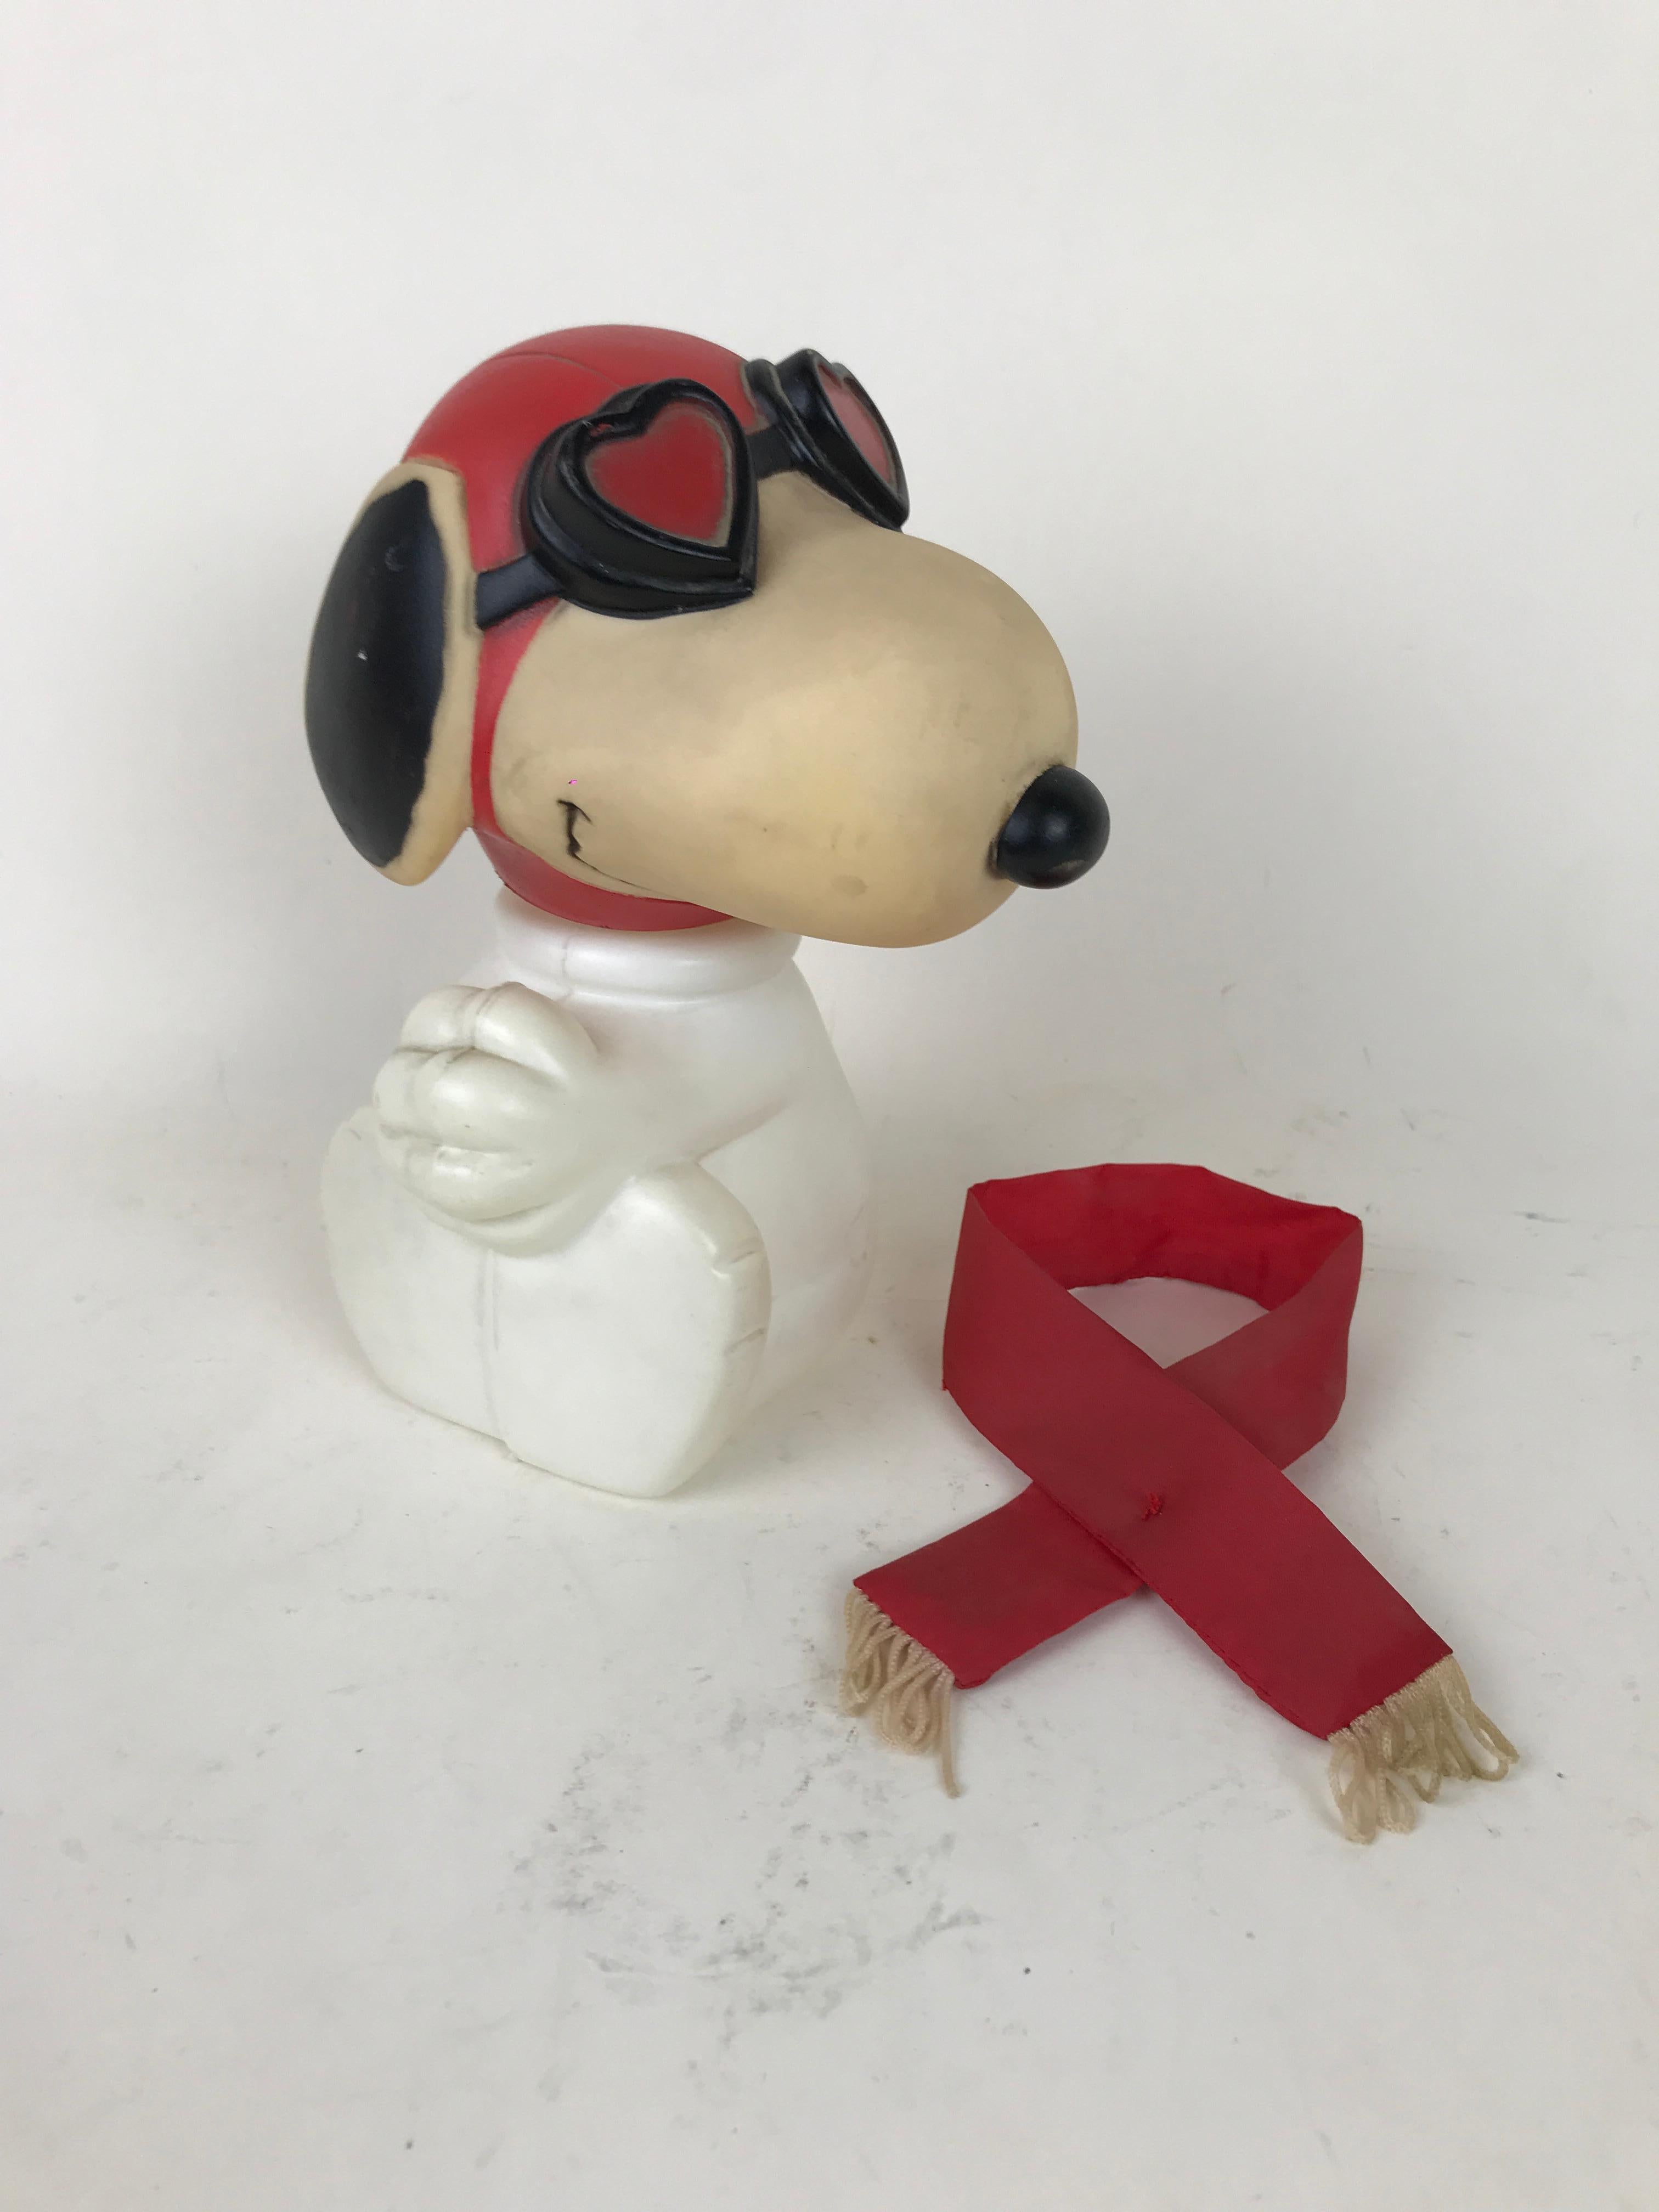 Mid-20th Century 1960s Vintage Plastic Model of Snoopy Wearing Scarf and Heart Shaped Googles